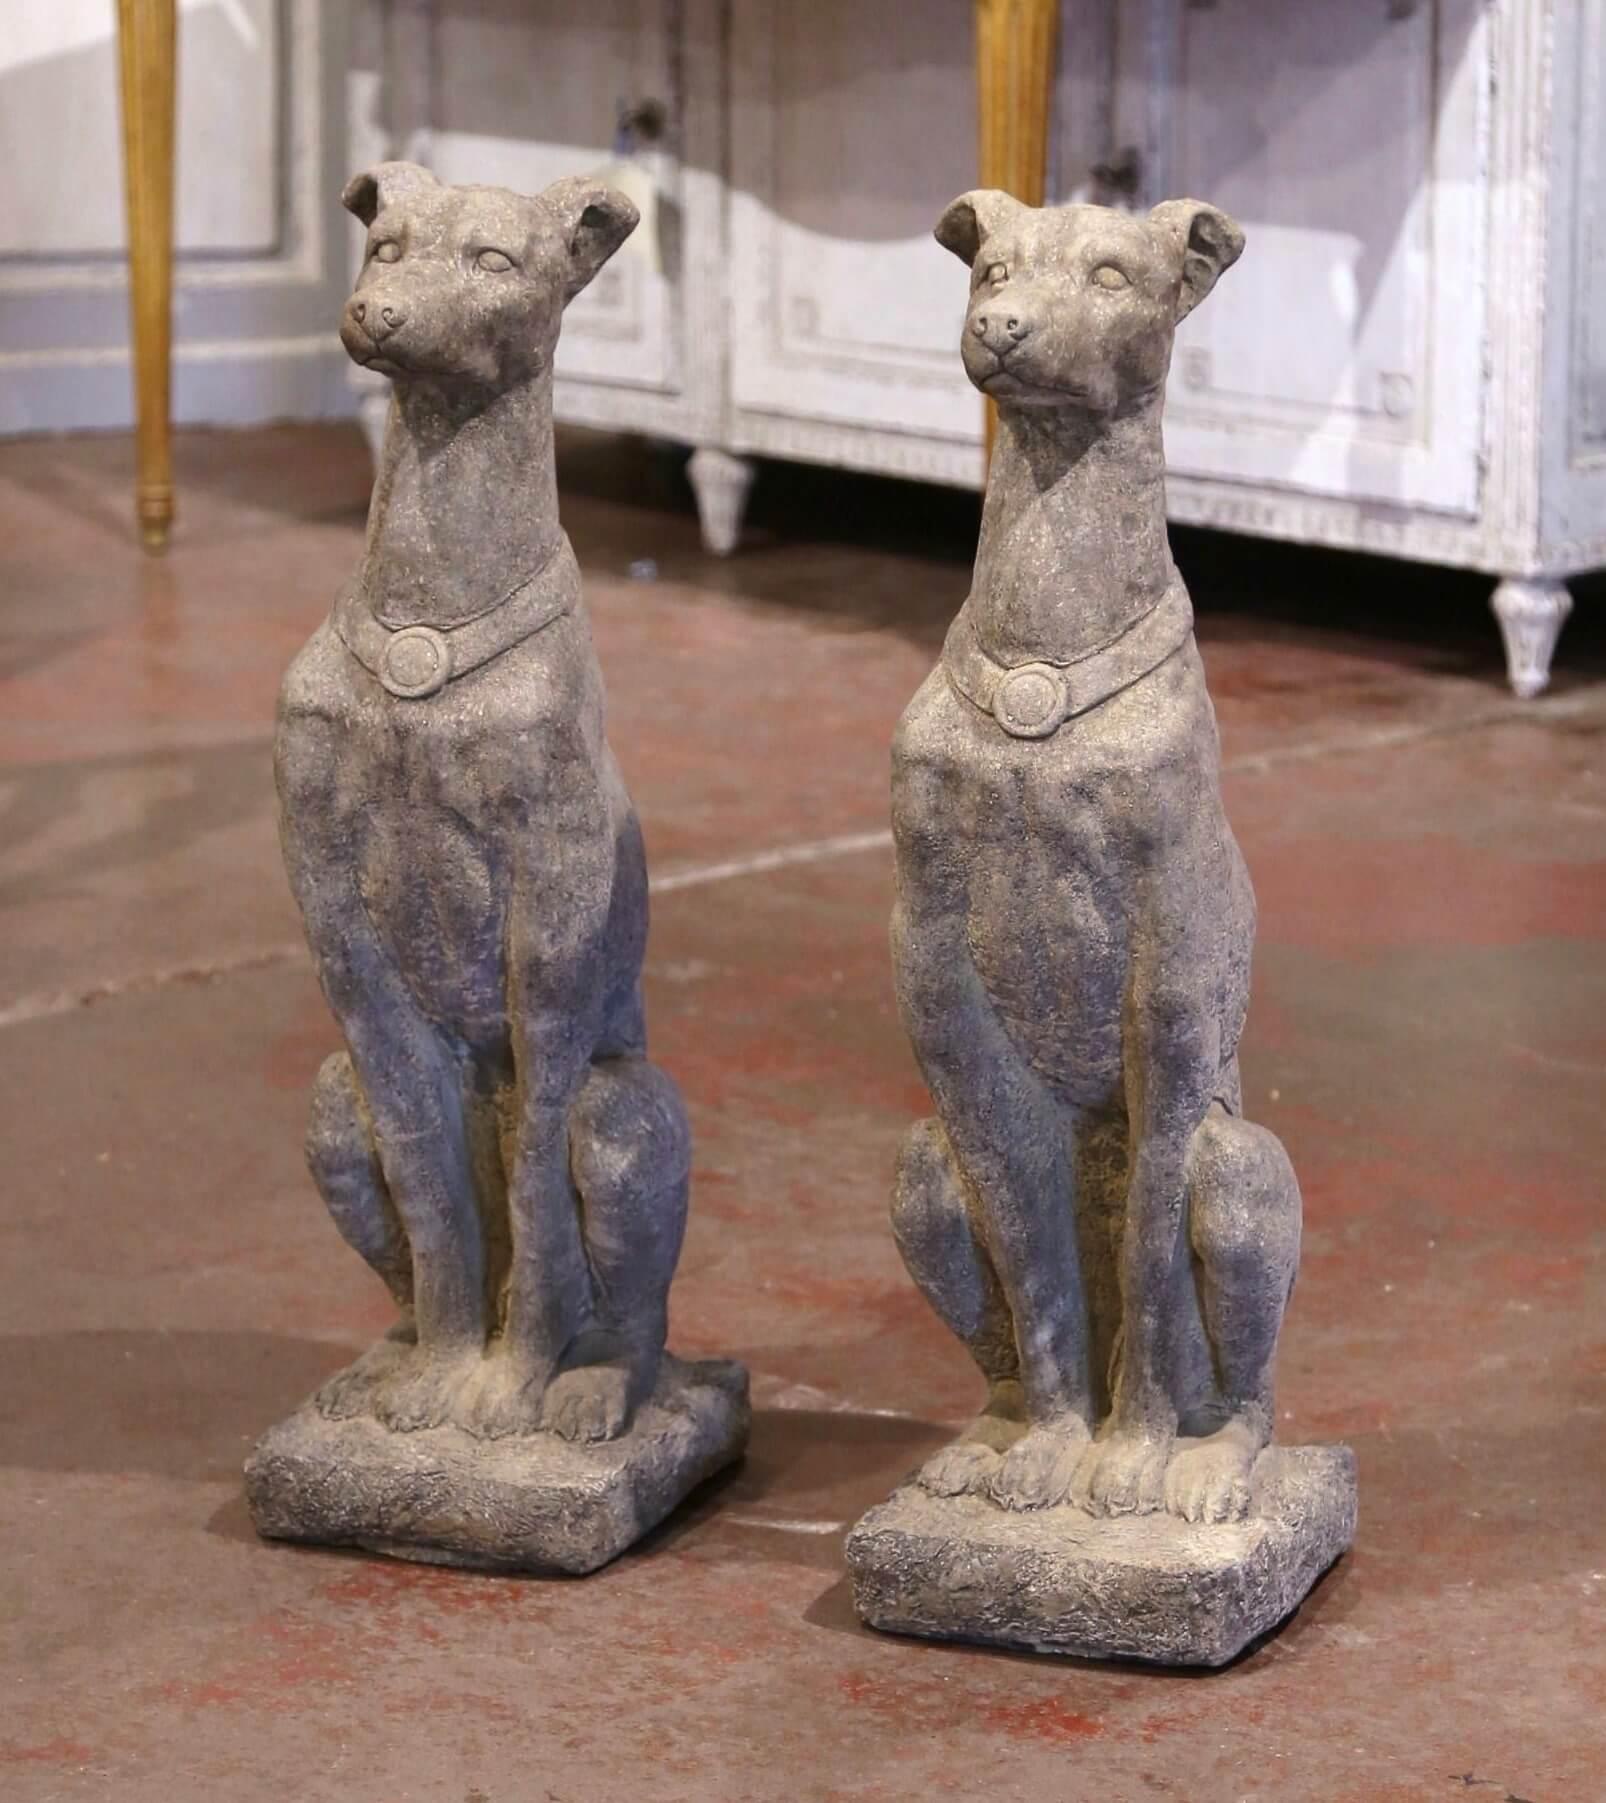 Hand-Carved Pair of Vintage Italian Outdoor Weathered Carved Stone Greyhound Dog Sculptures